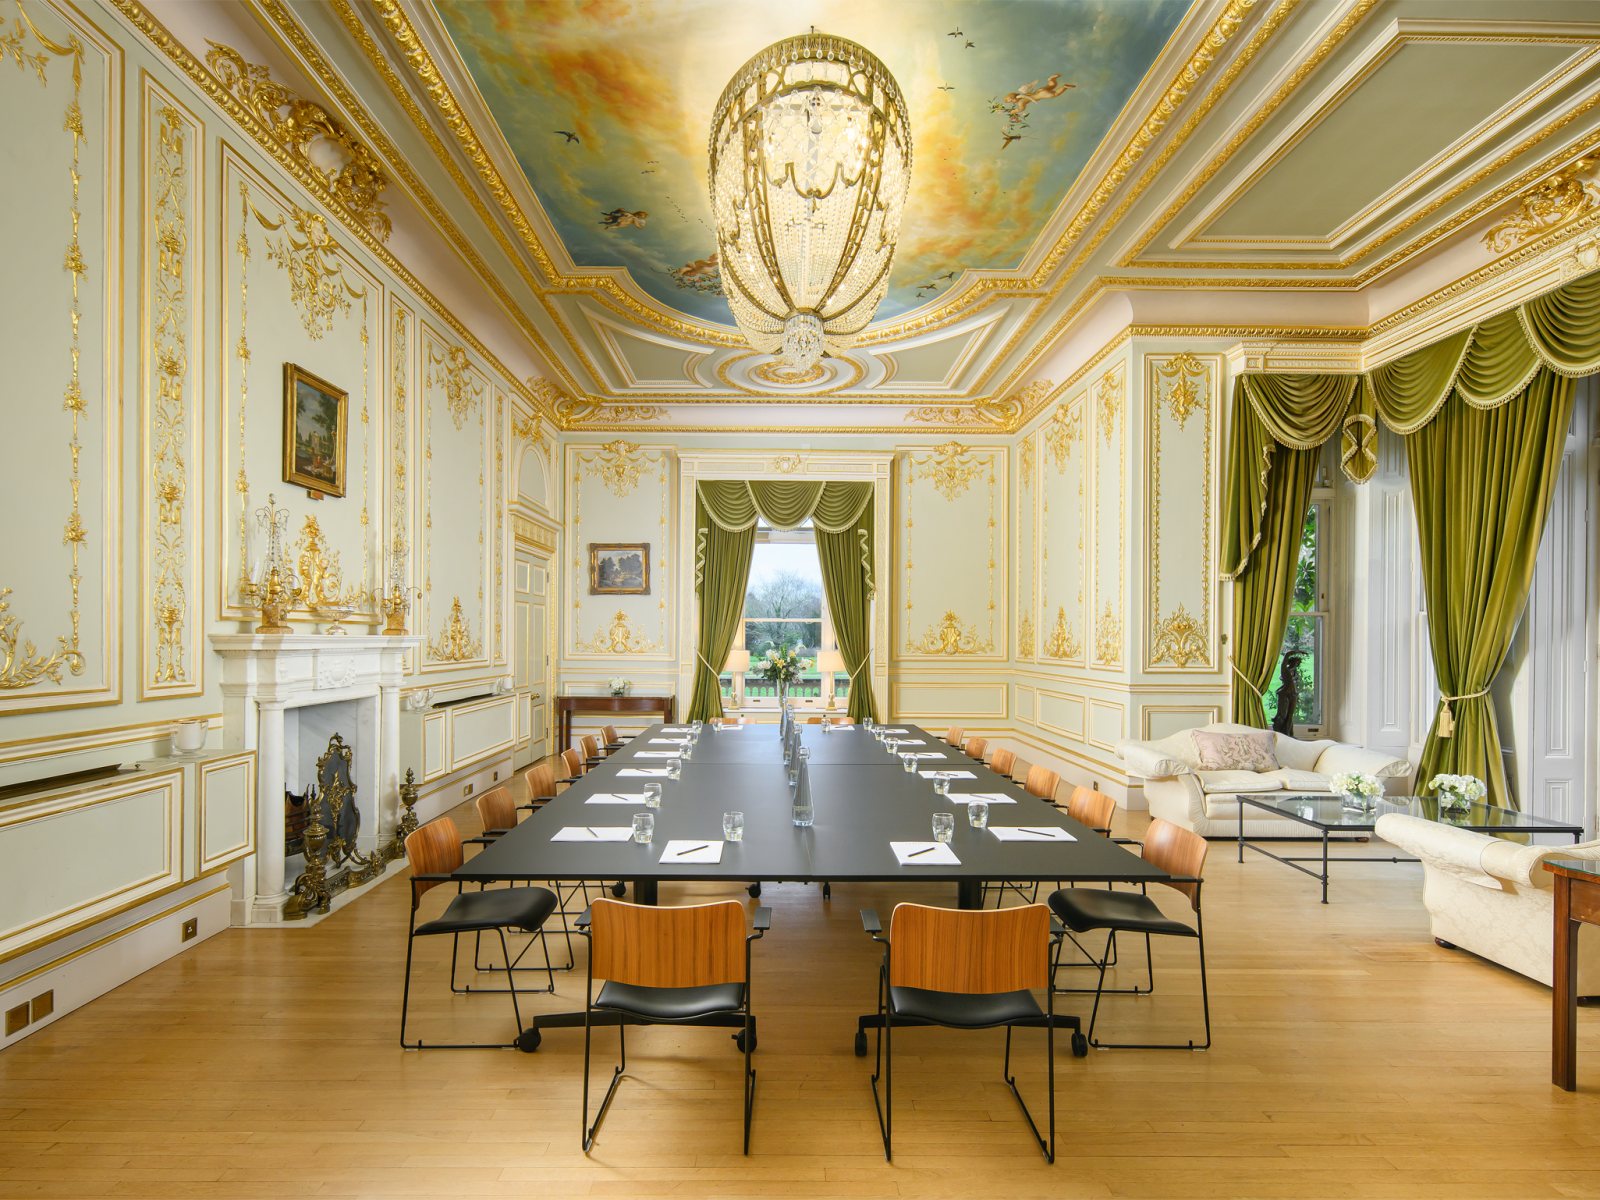 Meeting rooms in Leatherhead - The Salon at Fetcham Park set up for a boardroom meeting